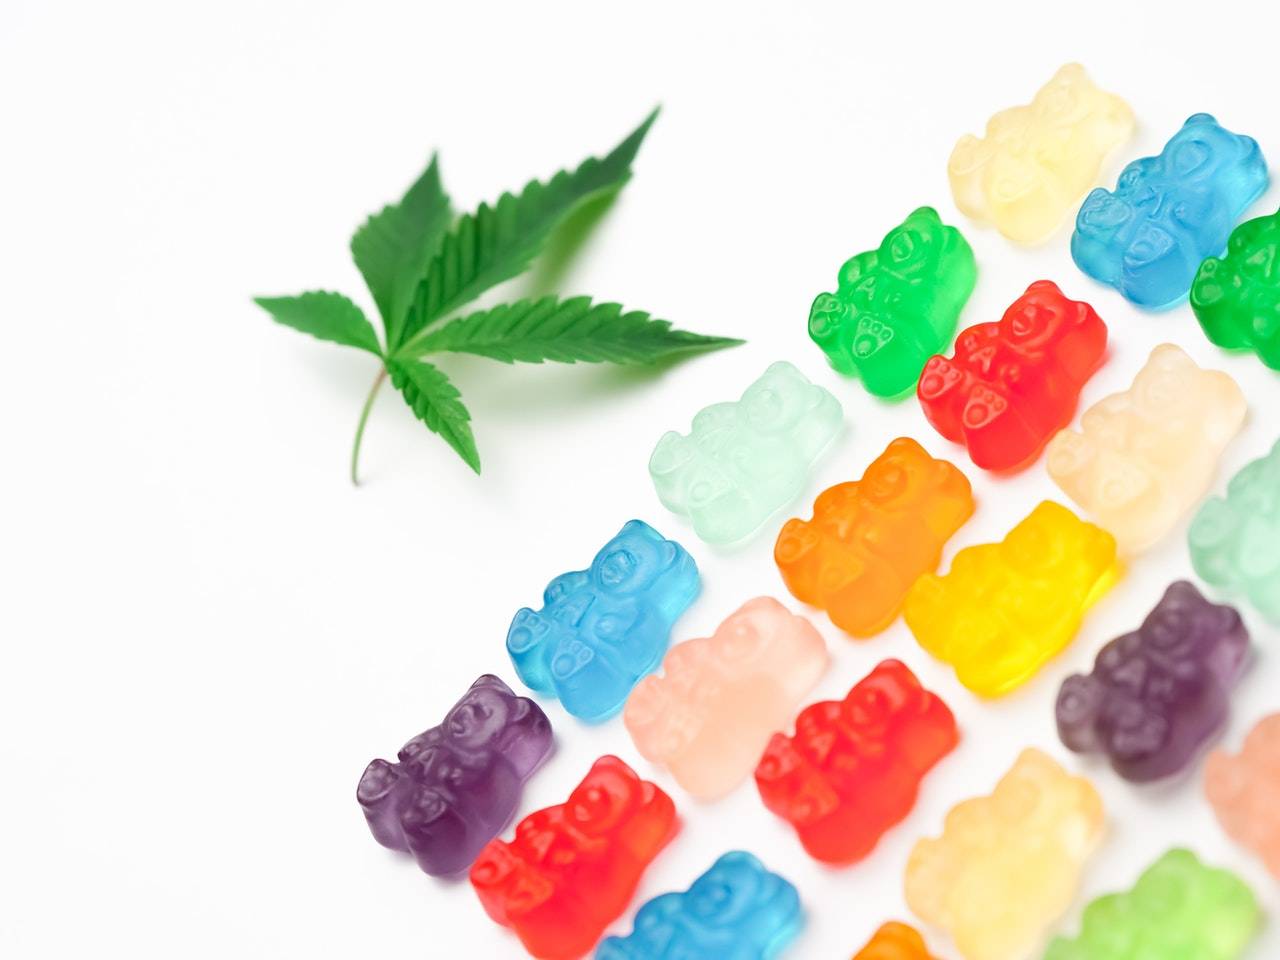 3 benefits of the overall CBD gummies on the market